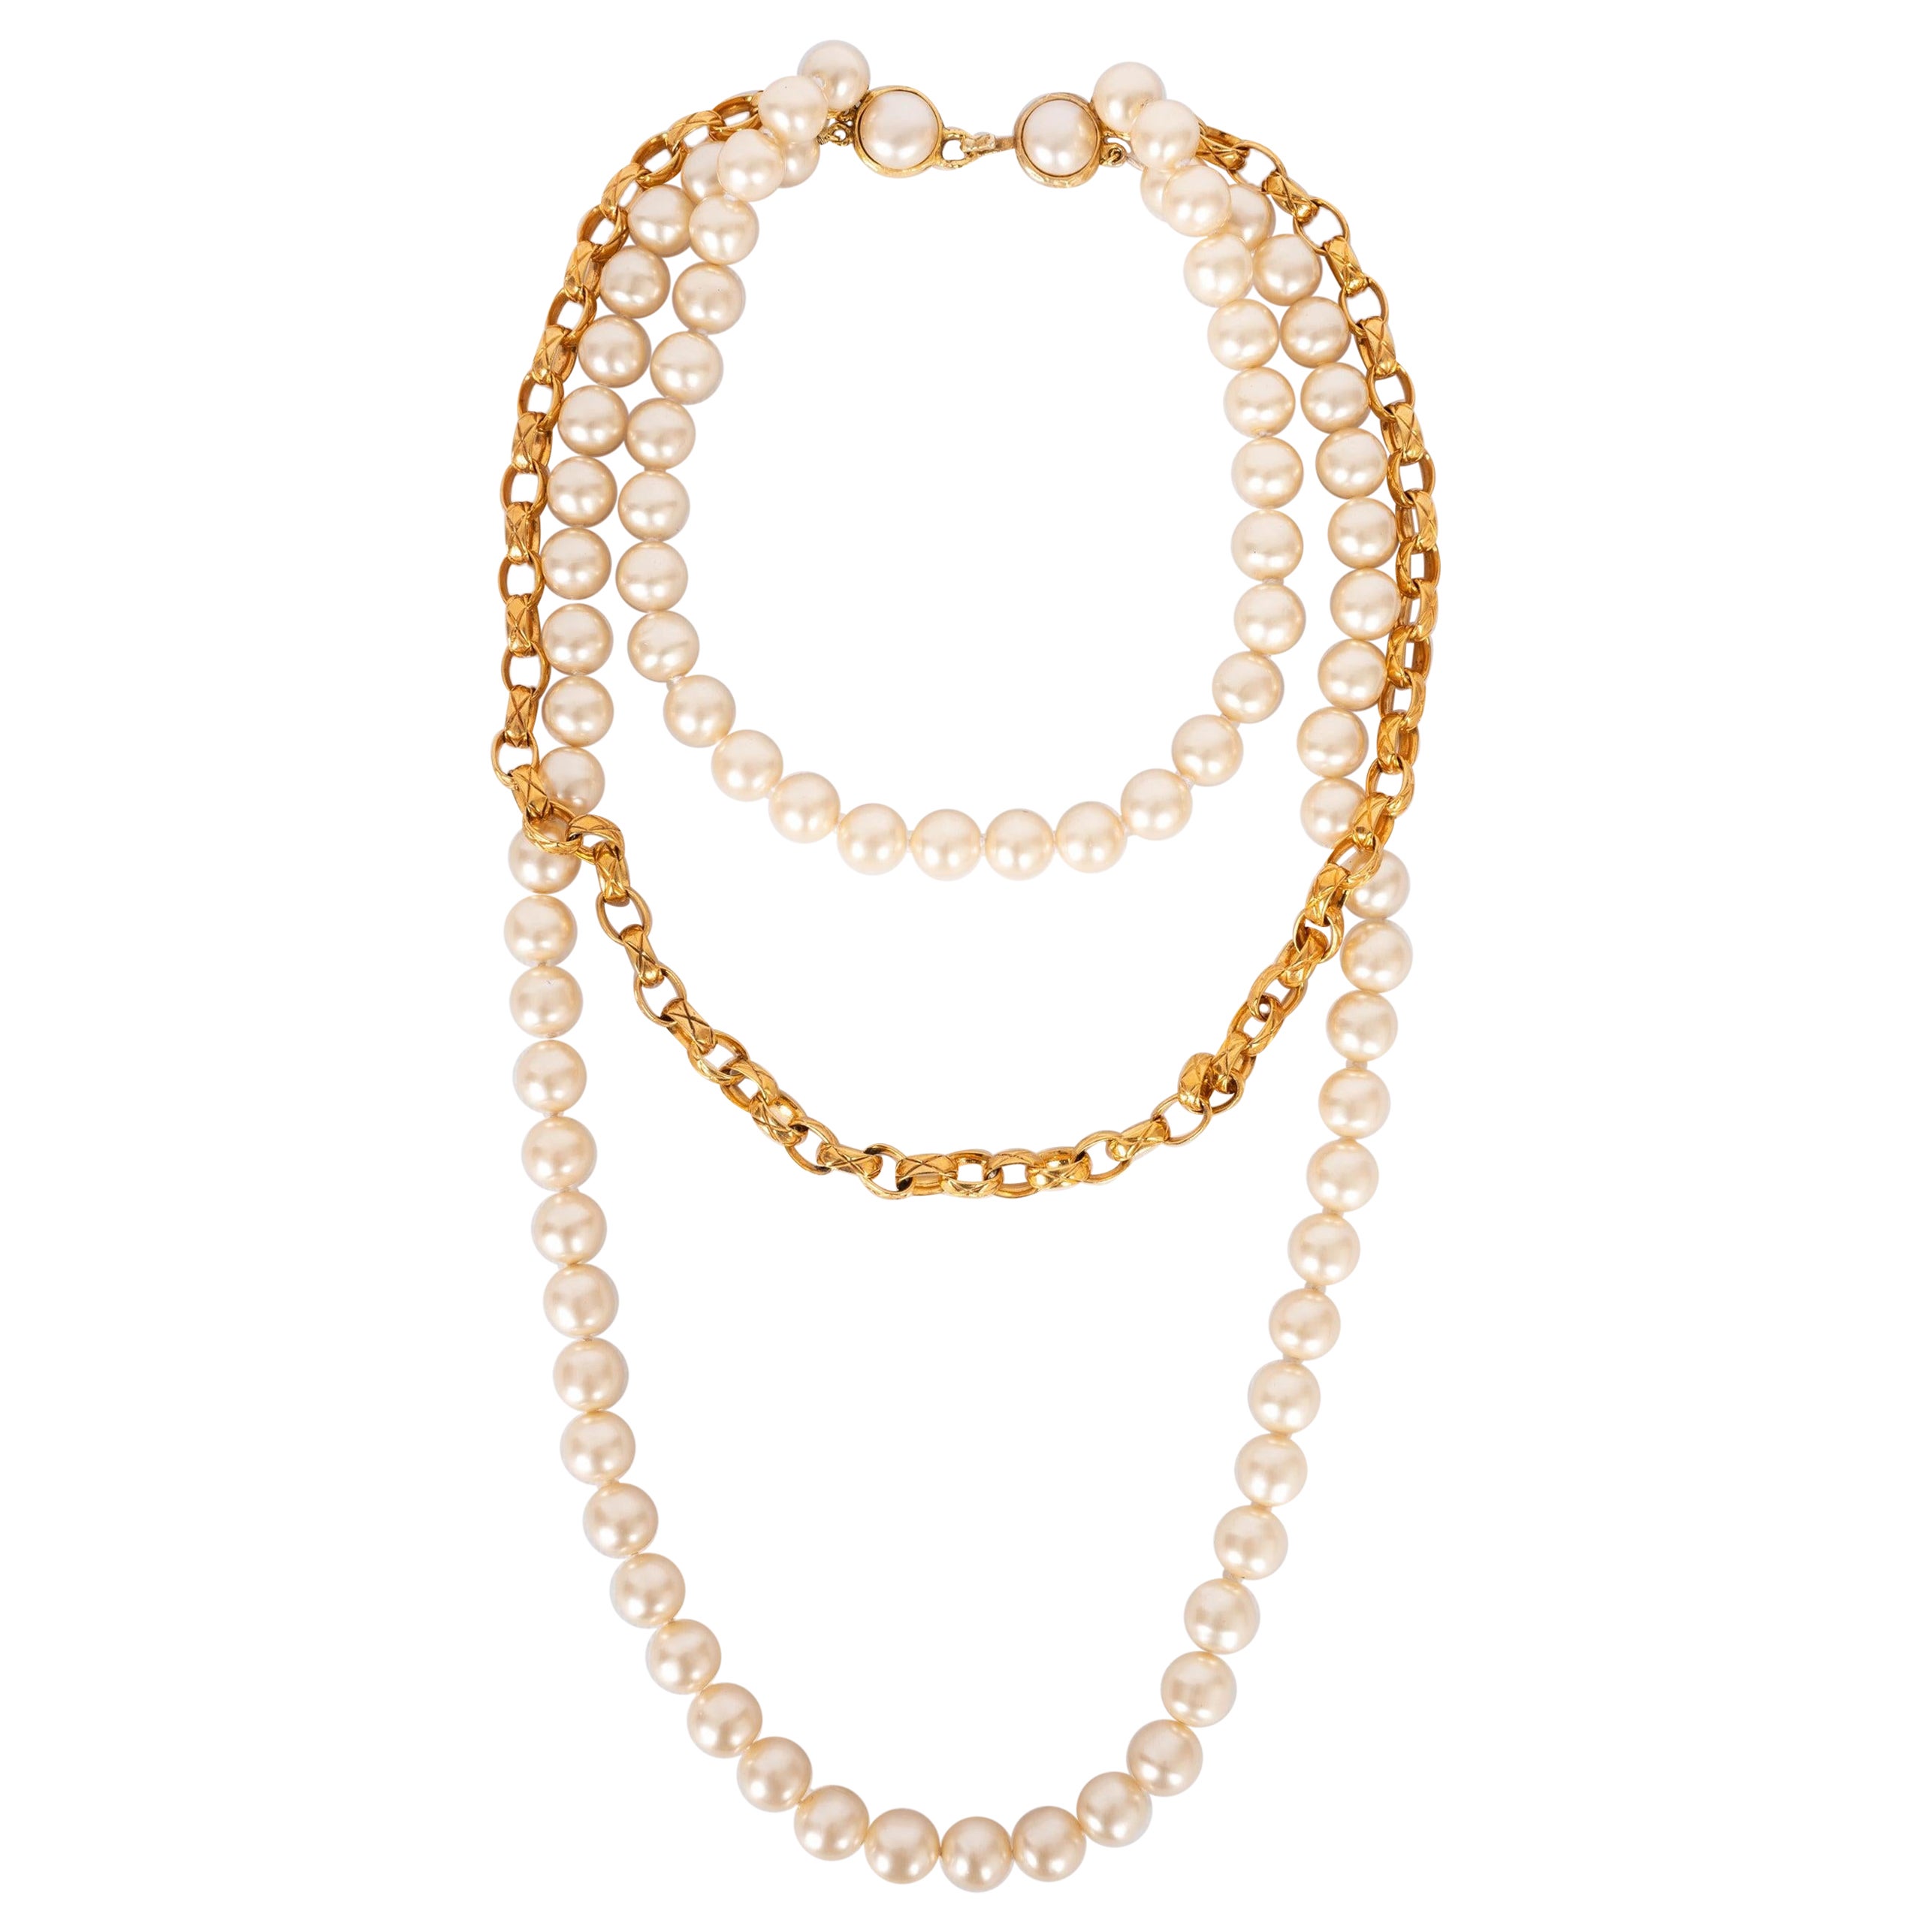 Chanel Necklace in Gold-Plated Metal and Costume Pearly Beads, 1990s